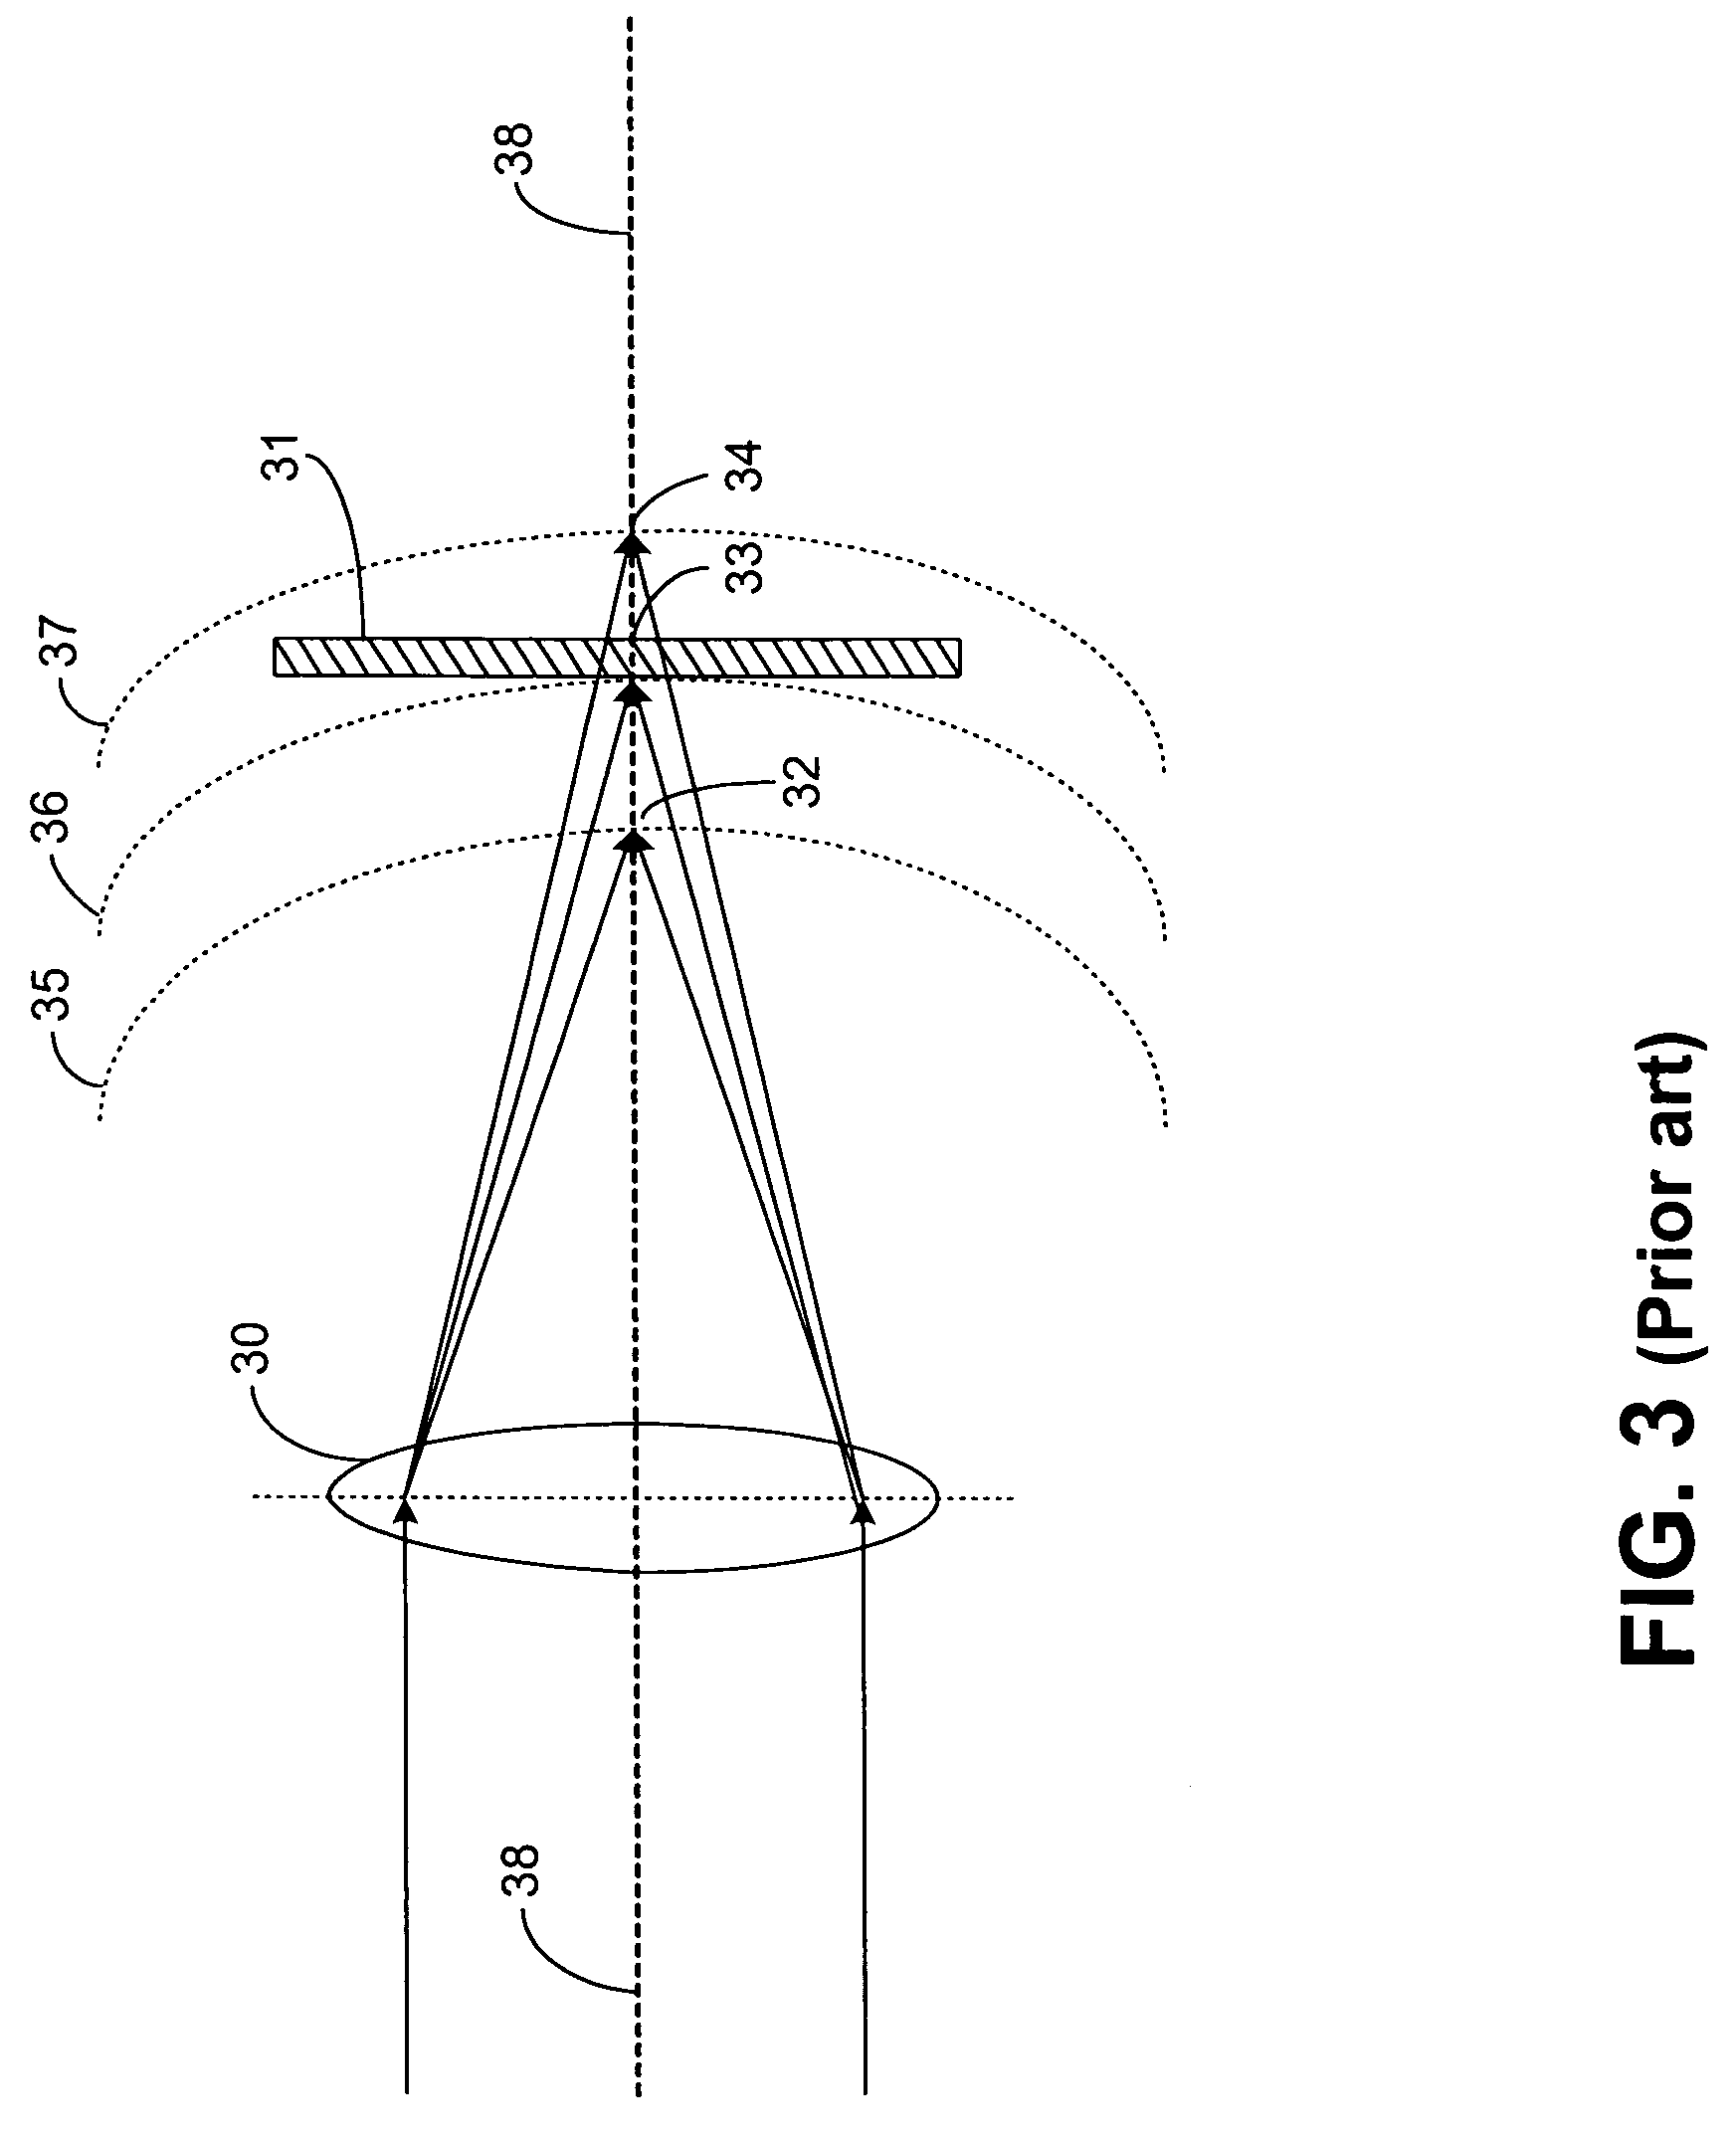 Imaging systems and methods